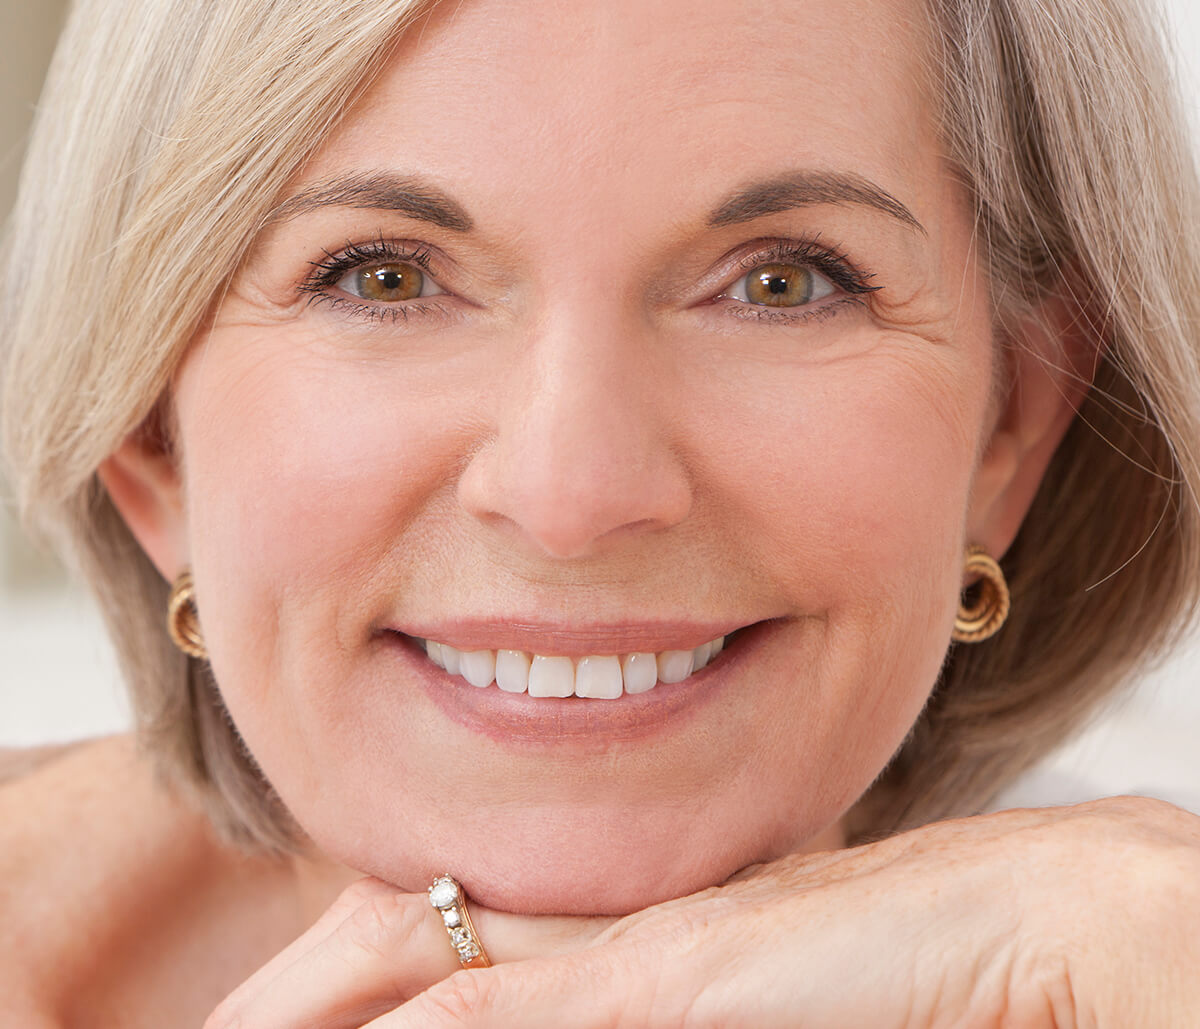 Quality Dentures Services in Fort Worth TX Area